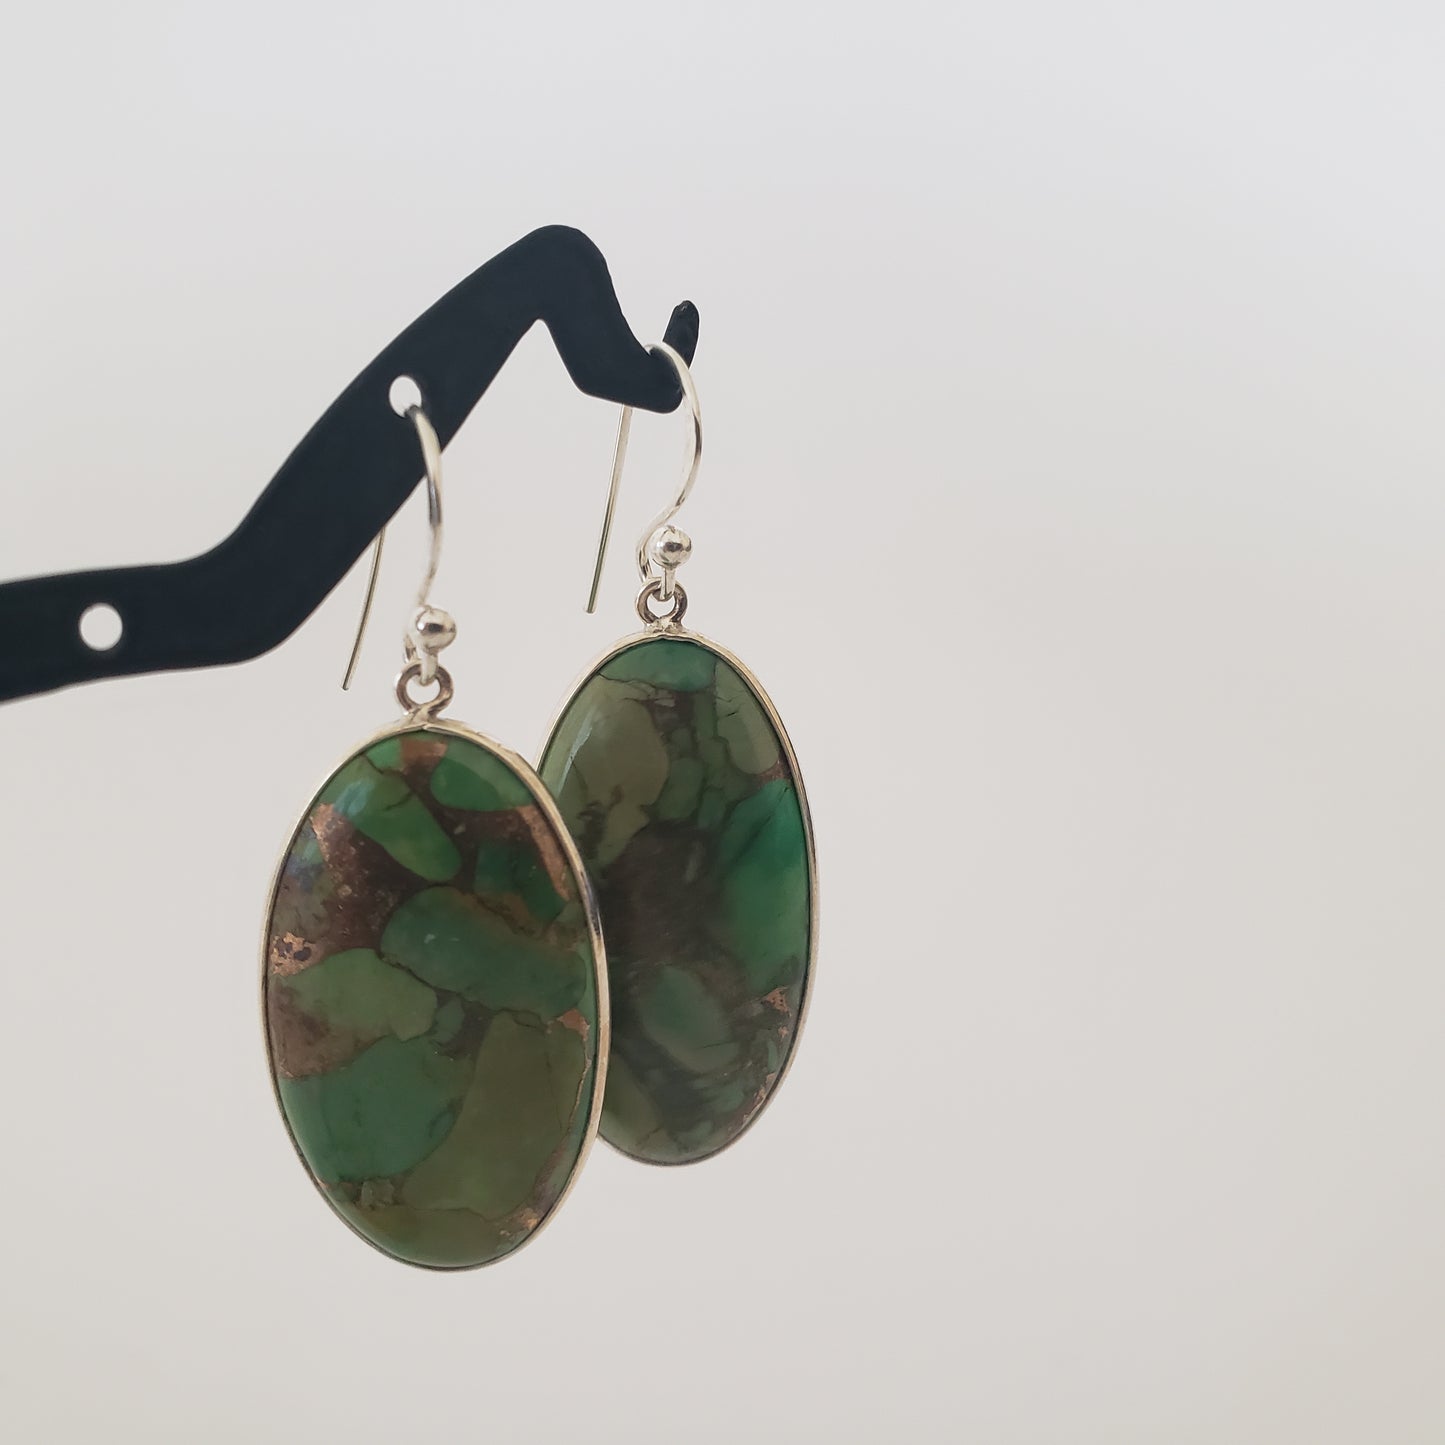 E Earrings,  Turquoise Picasso,  Sterling Silver